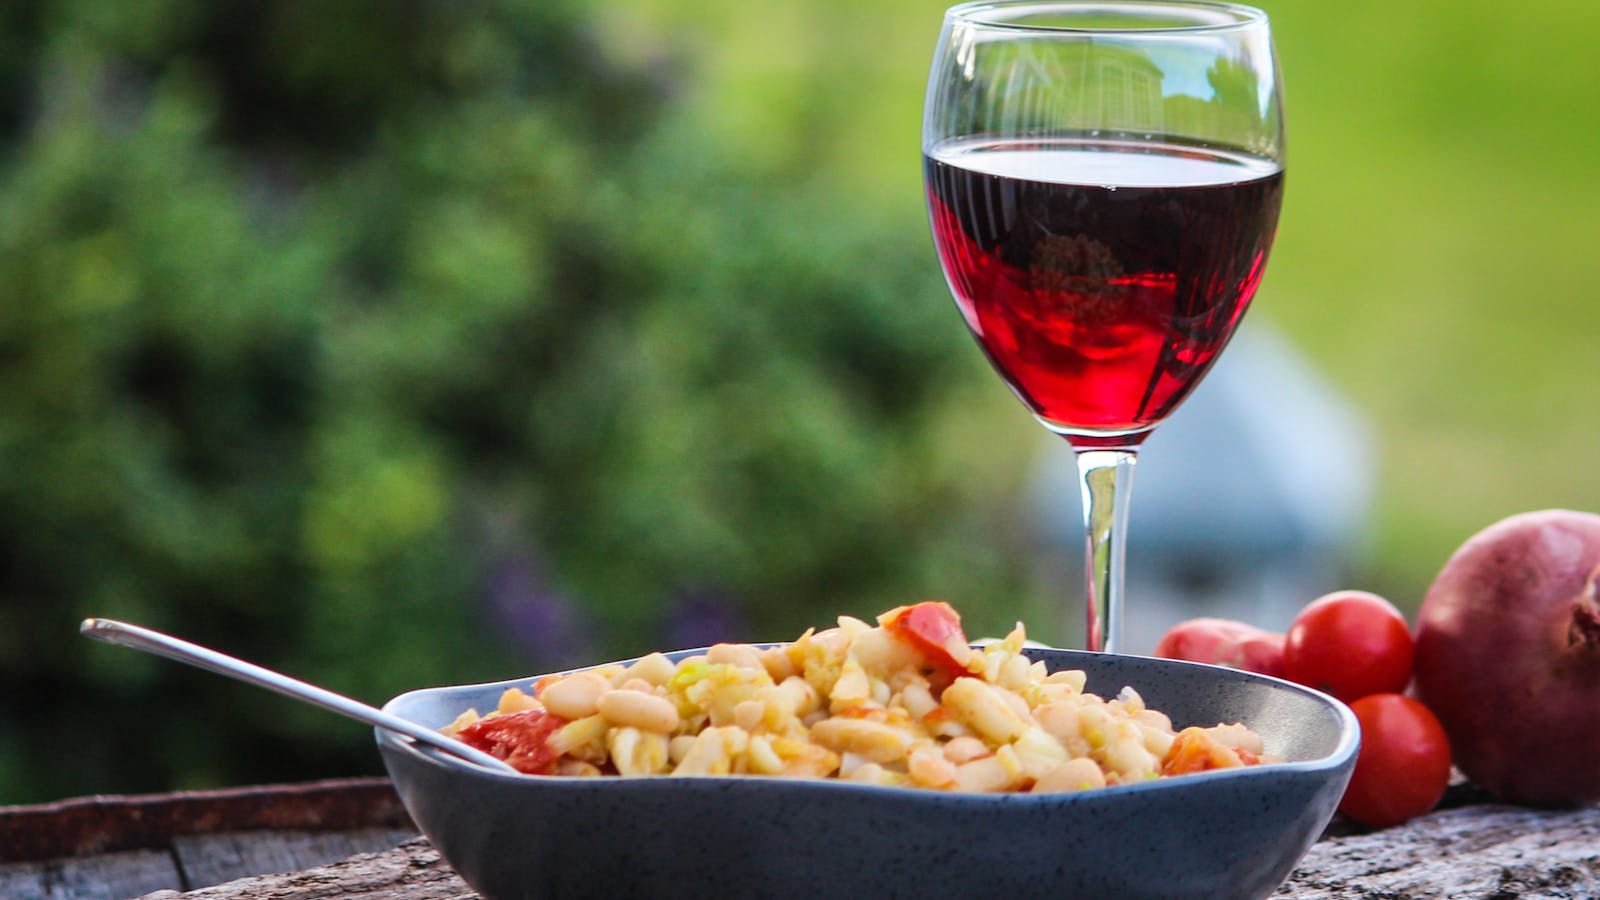 Pasta e fagioli with a glass of Tassie red